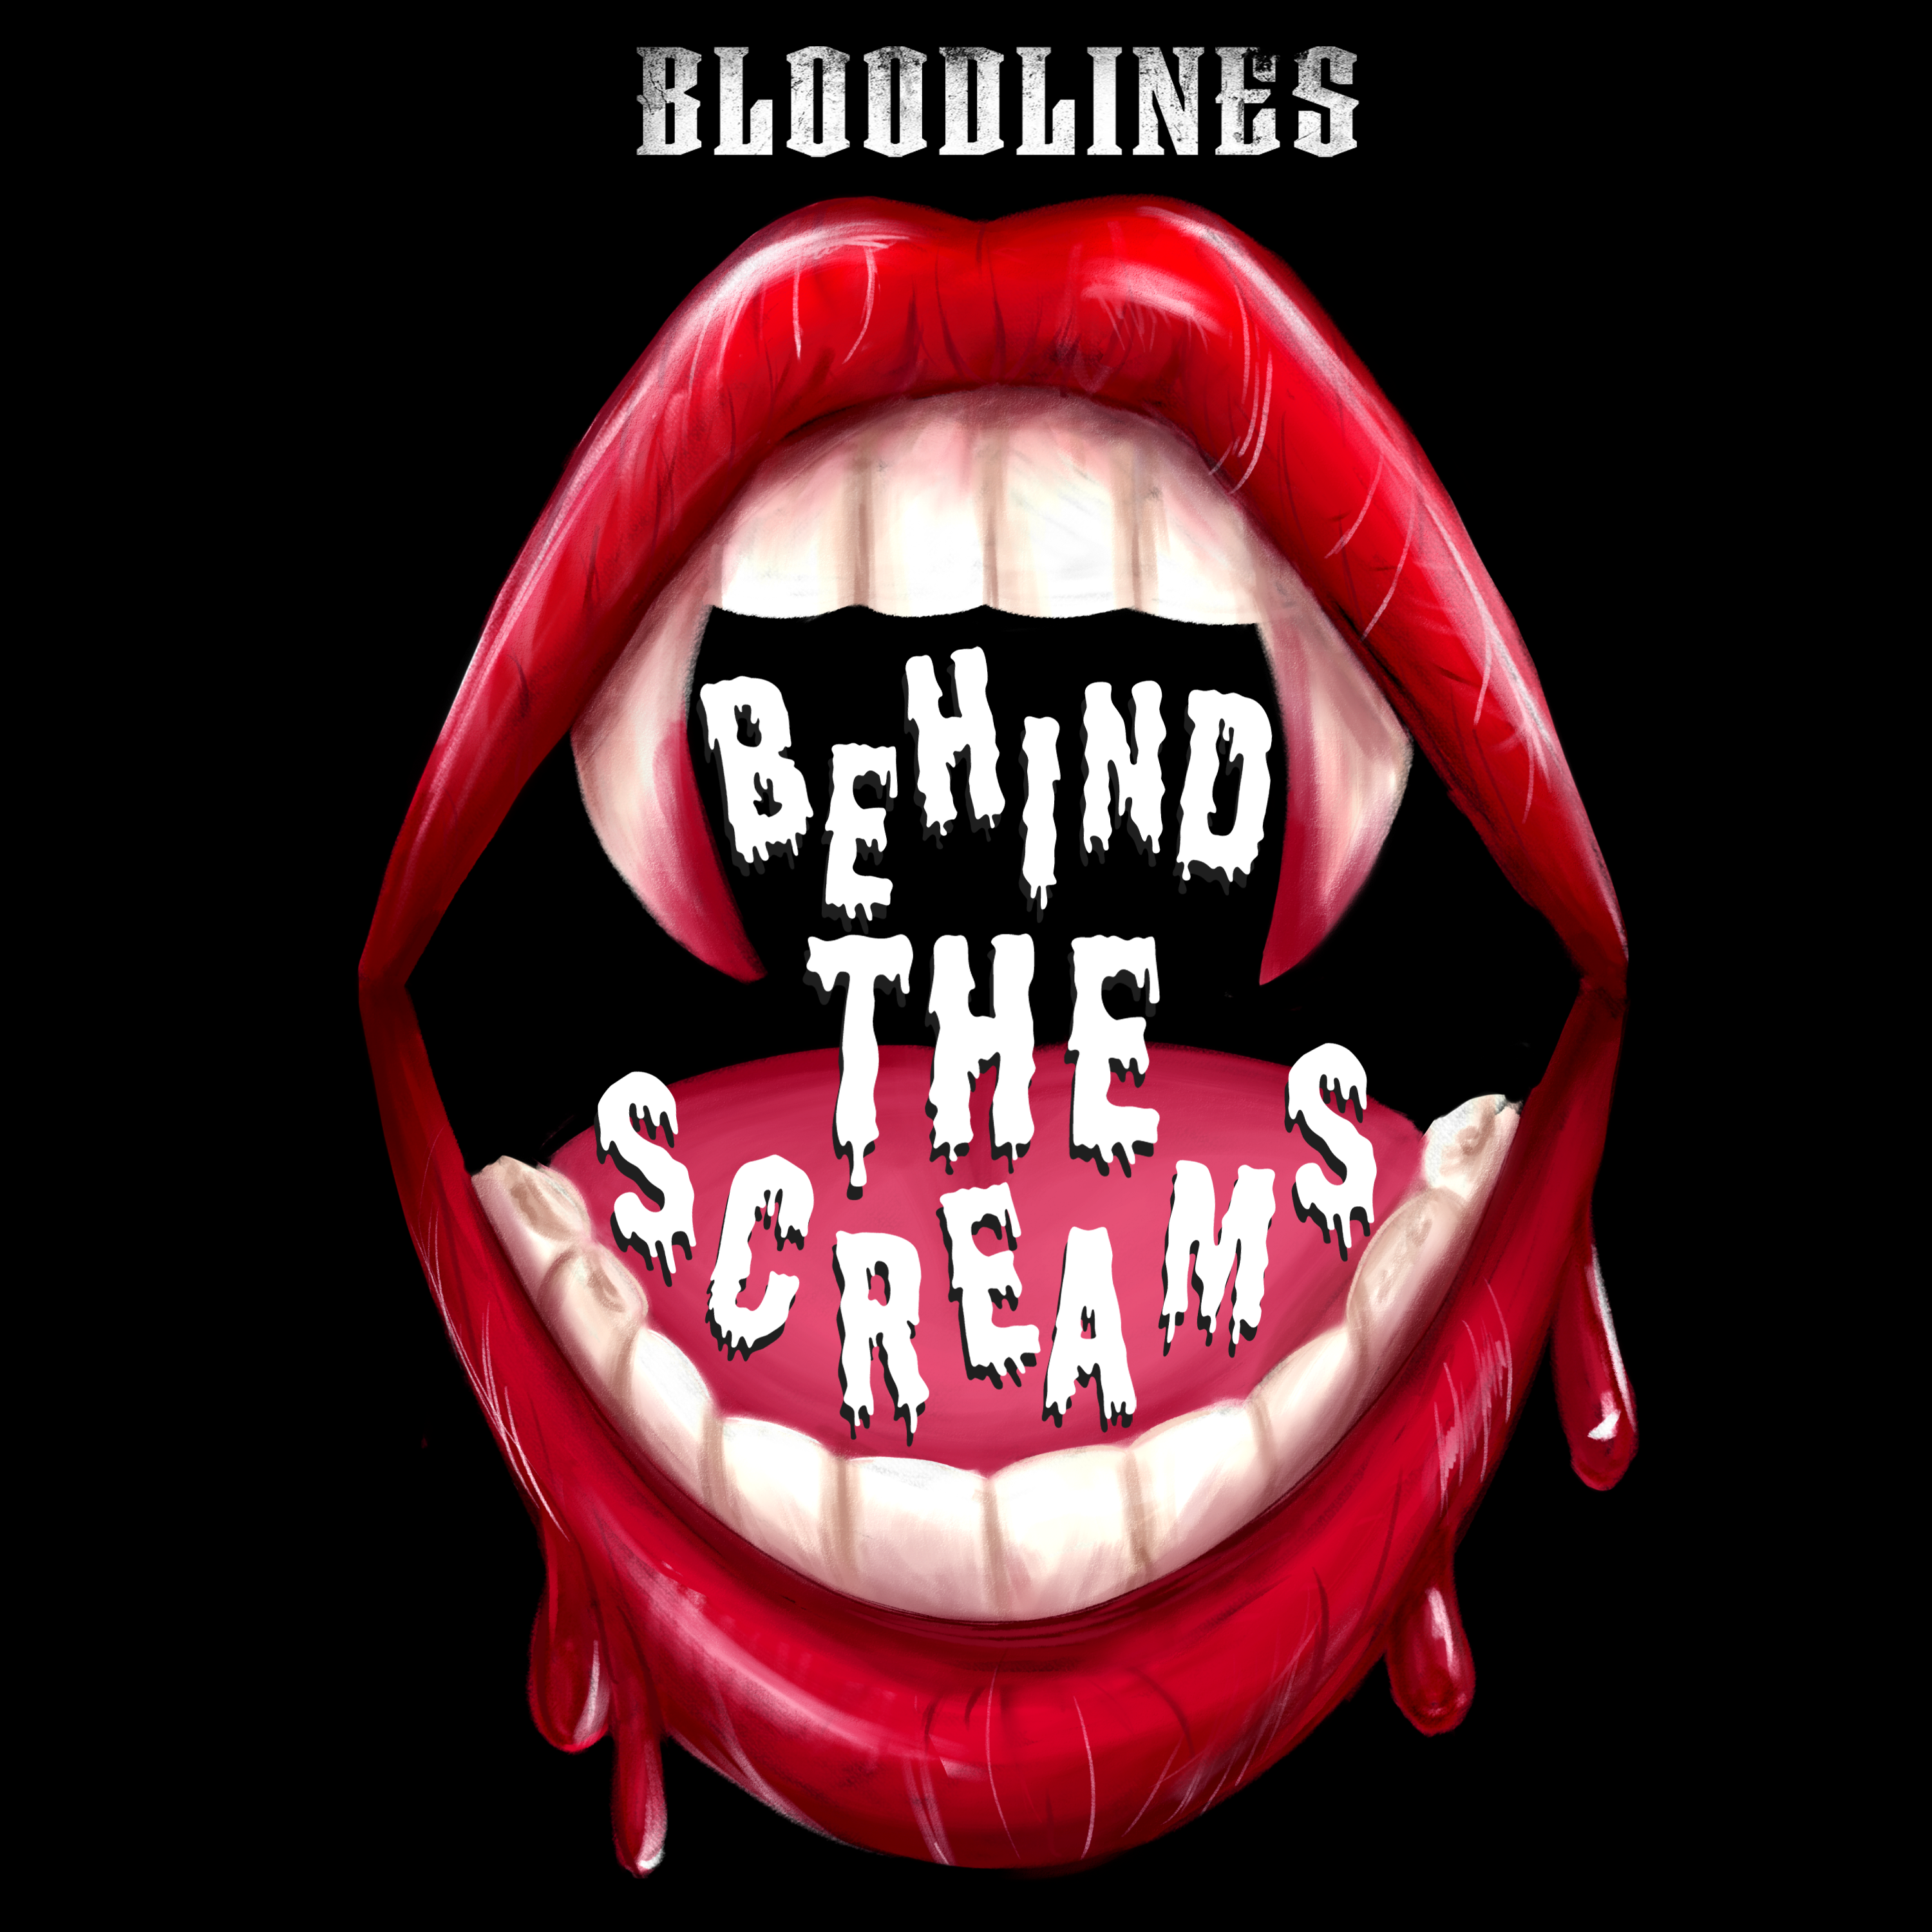 5.2 Behind The Screams: Lucy Warringer